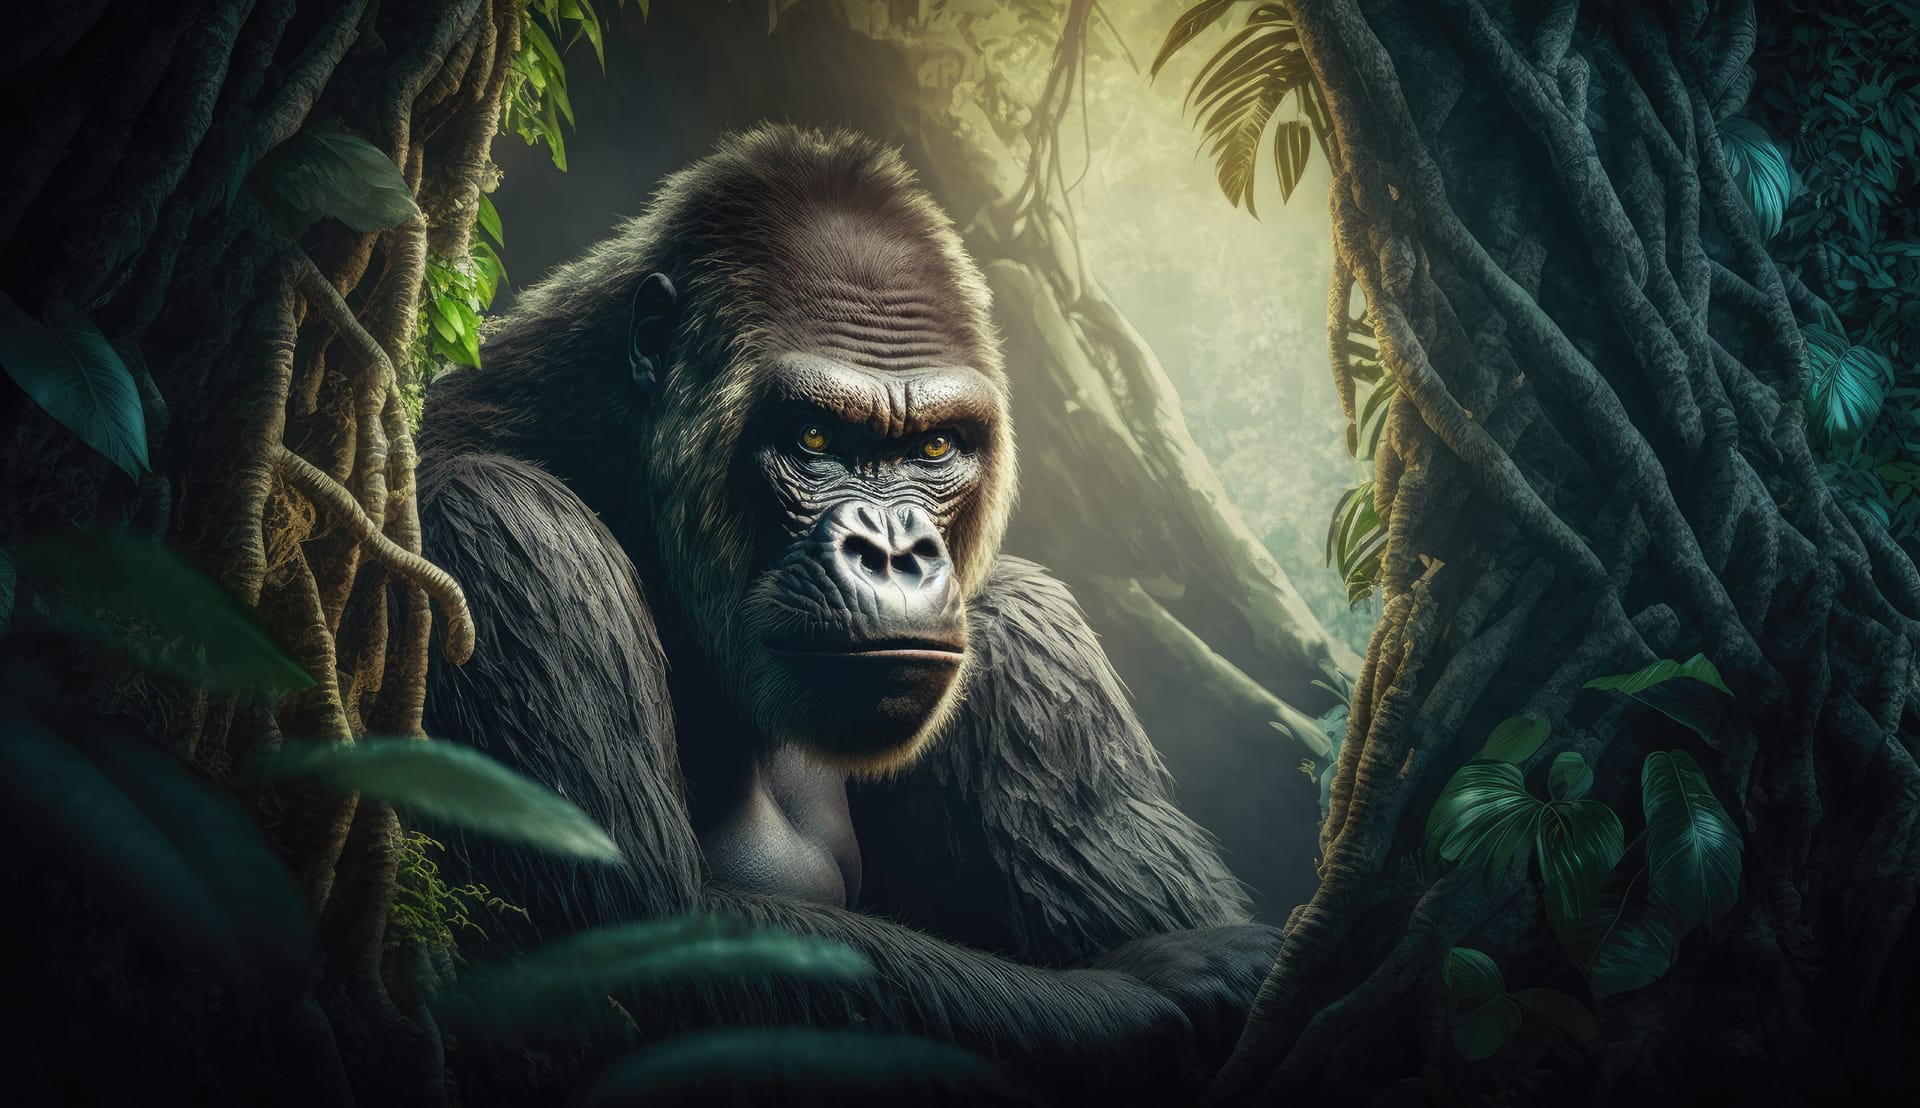 Gorilla jungle with green background animal image